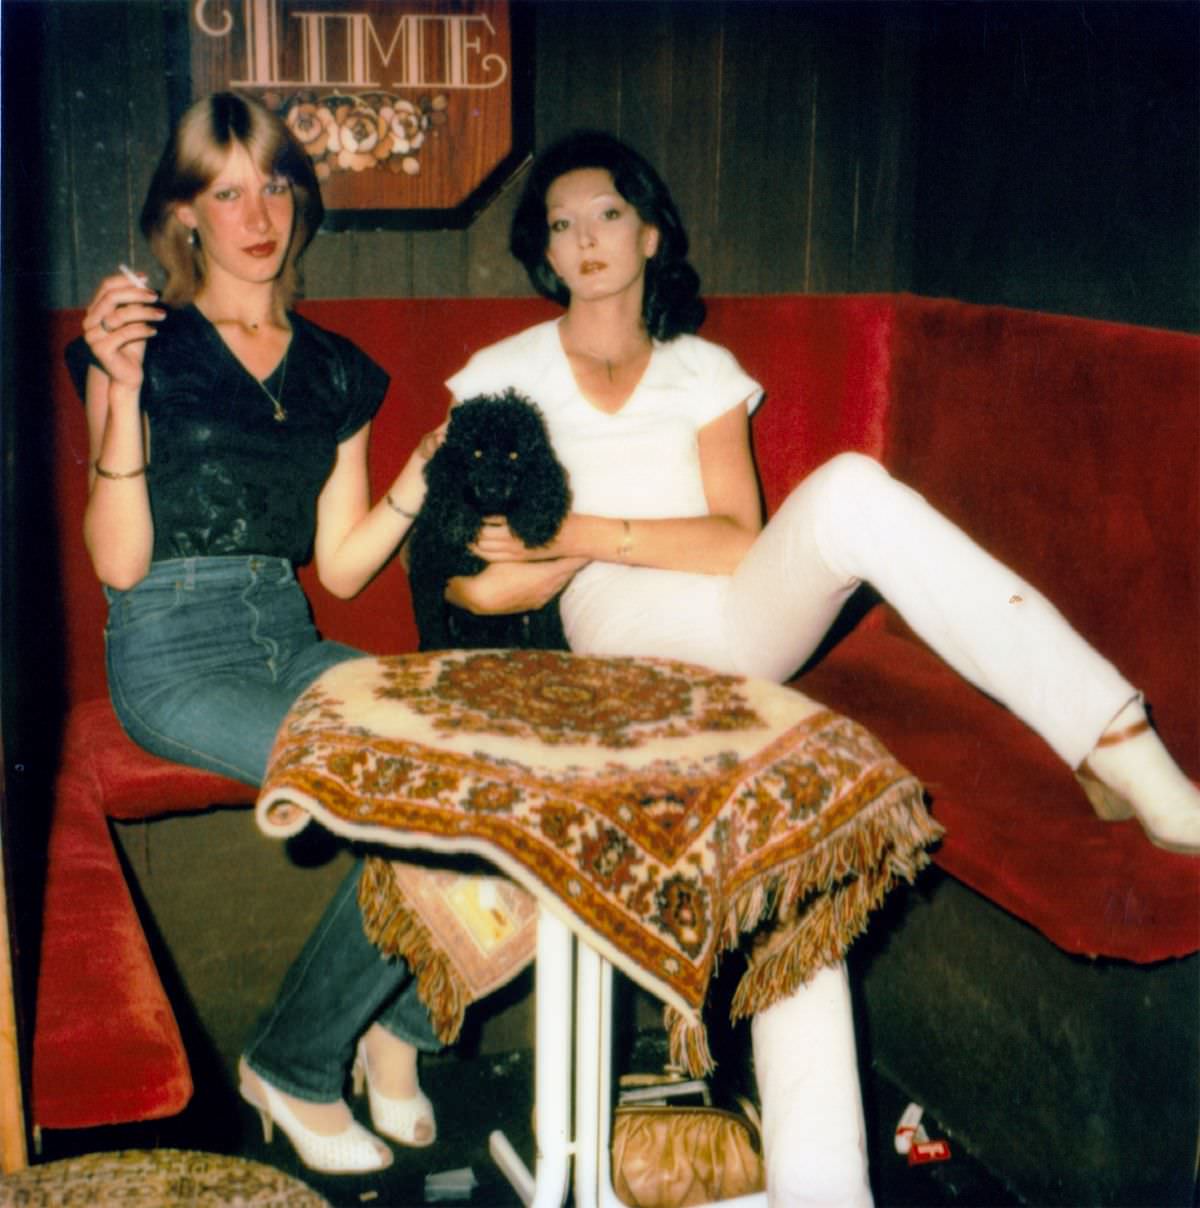 Vintage Photos of the Drunks and Weirdos in Amsterdam’s Red Light District Bars in the 1980s